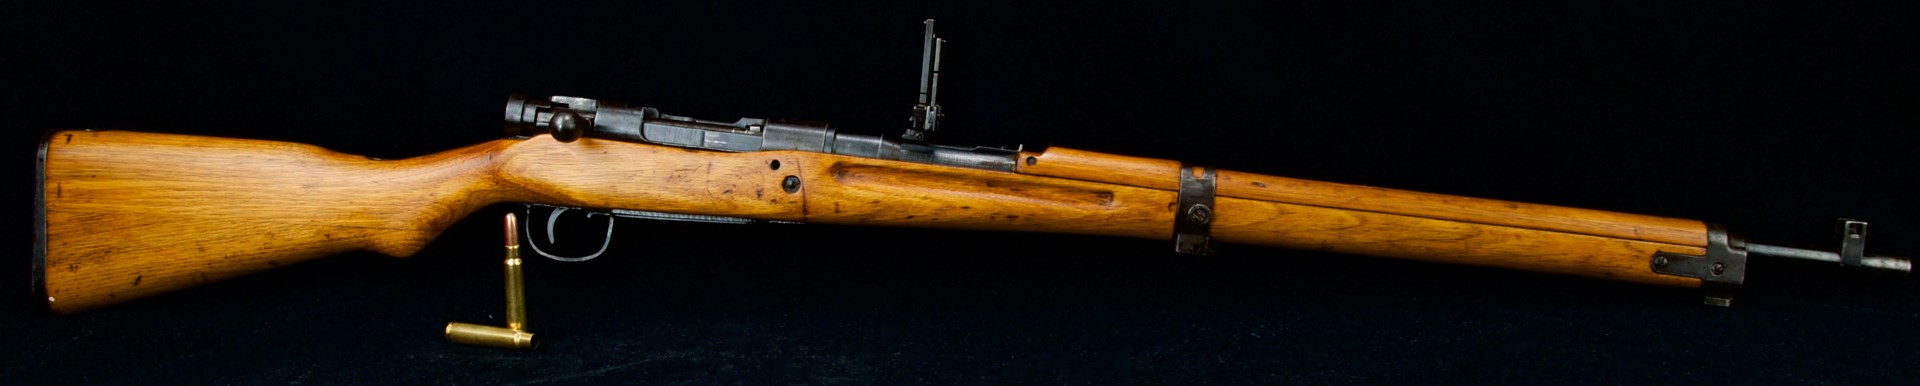 right-side view Arisaka bolt-action military surplus rifle japanese gun black background ammunition foreground bullets